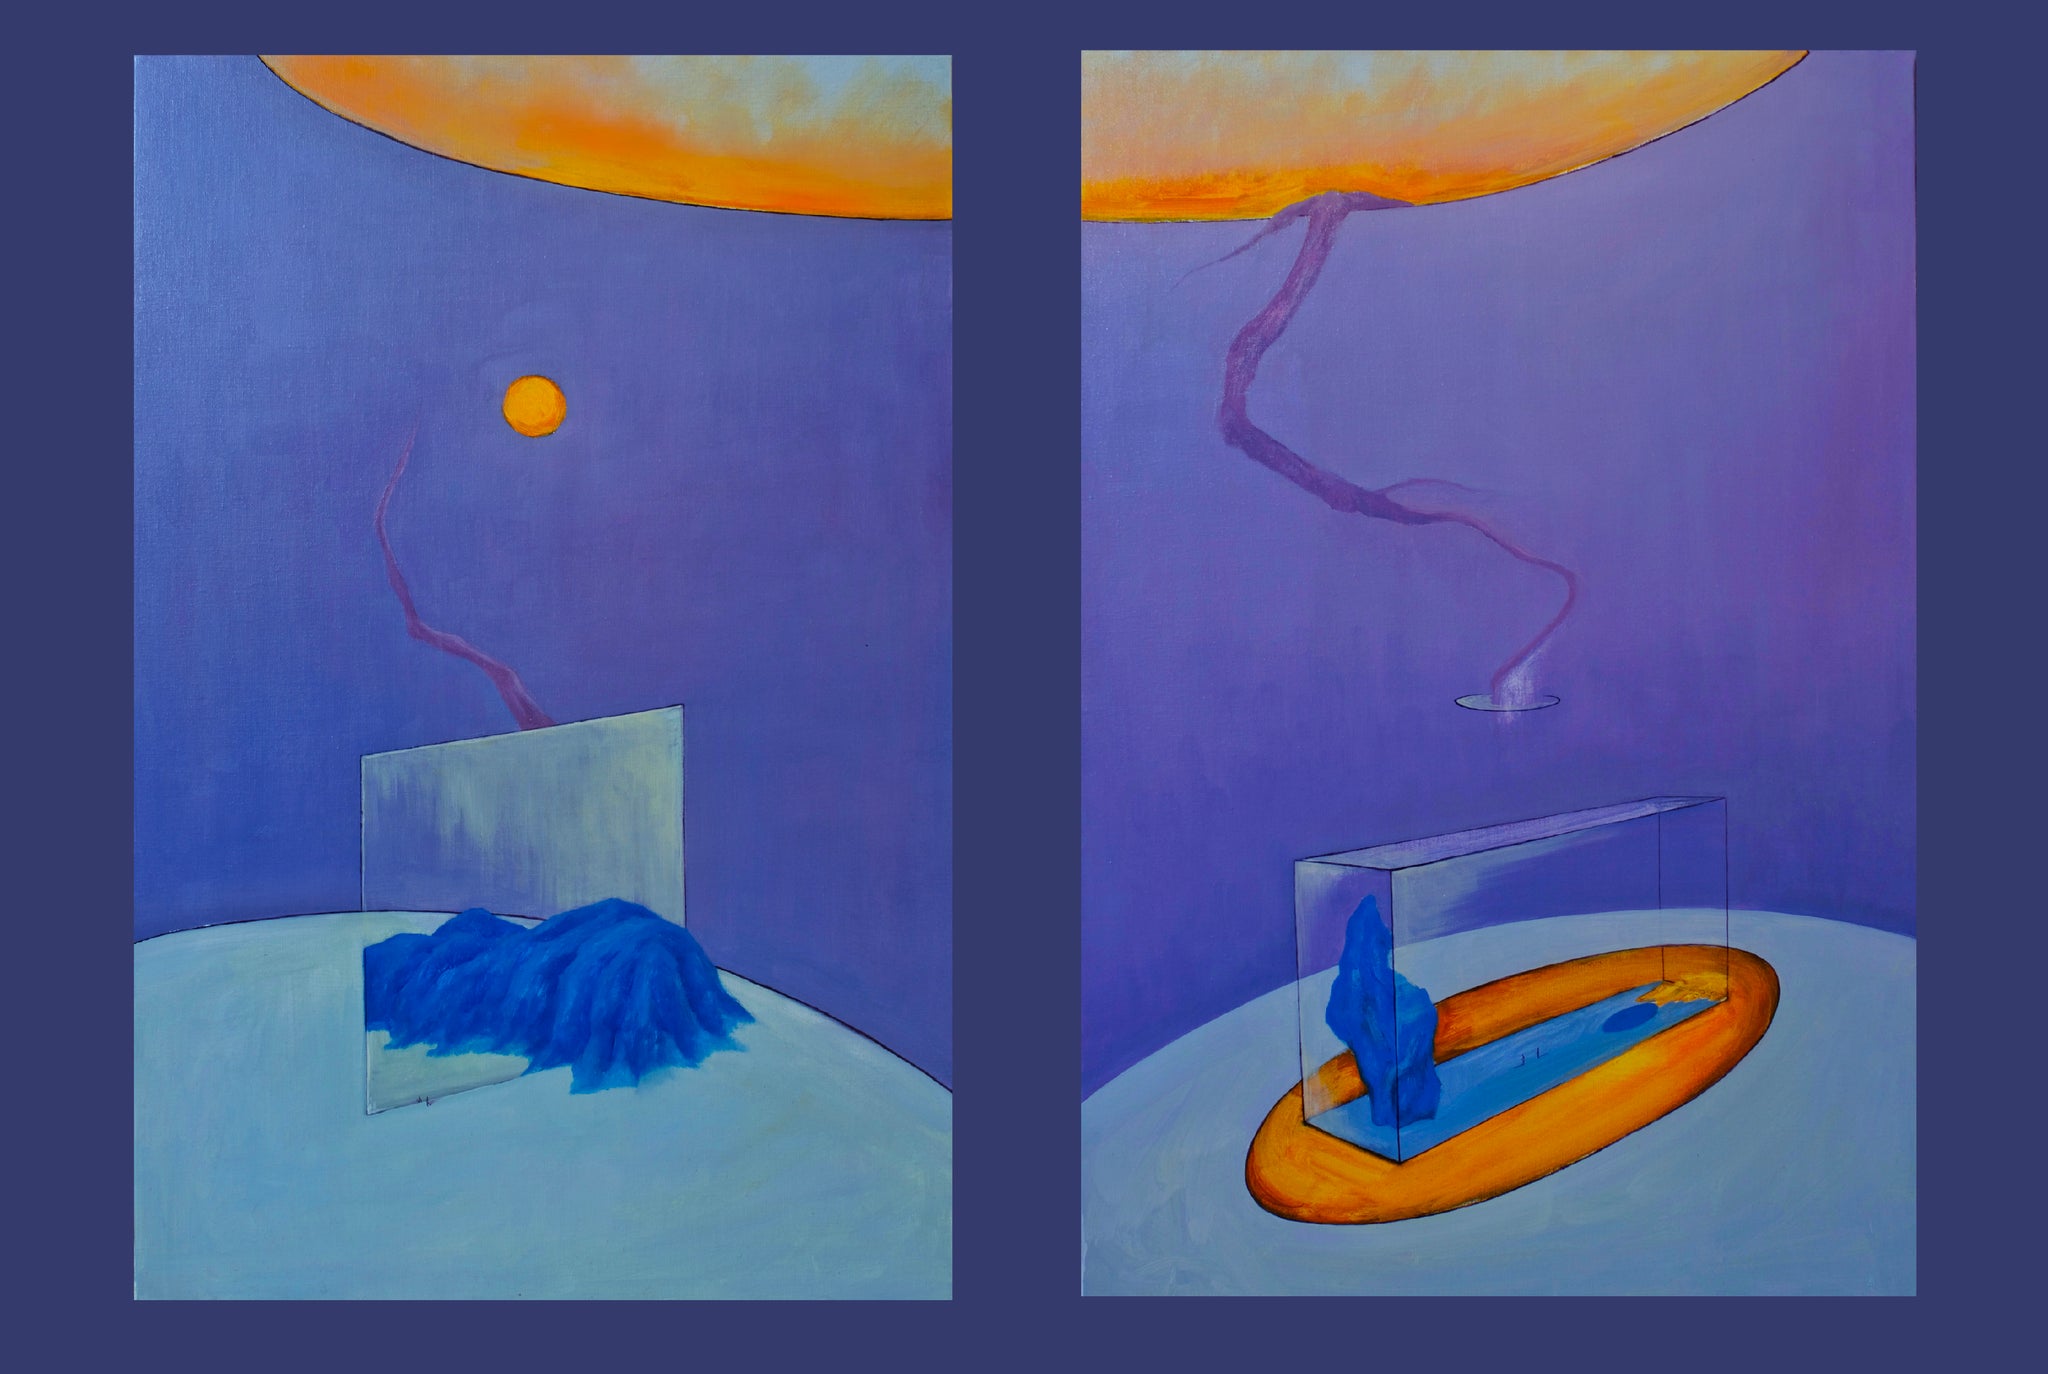 Chen Mo, 'A Diptych About the Transmigration', 2020